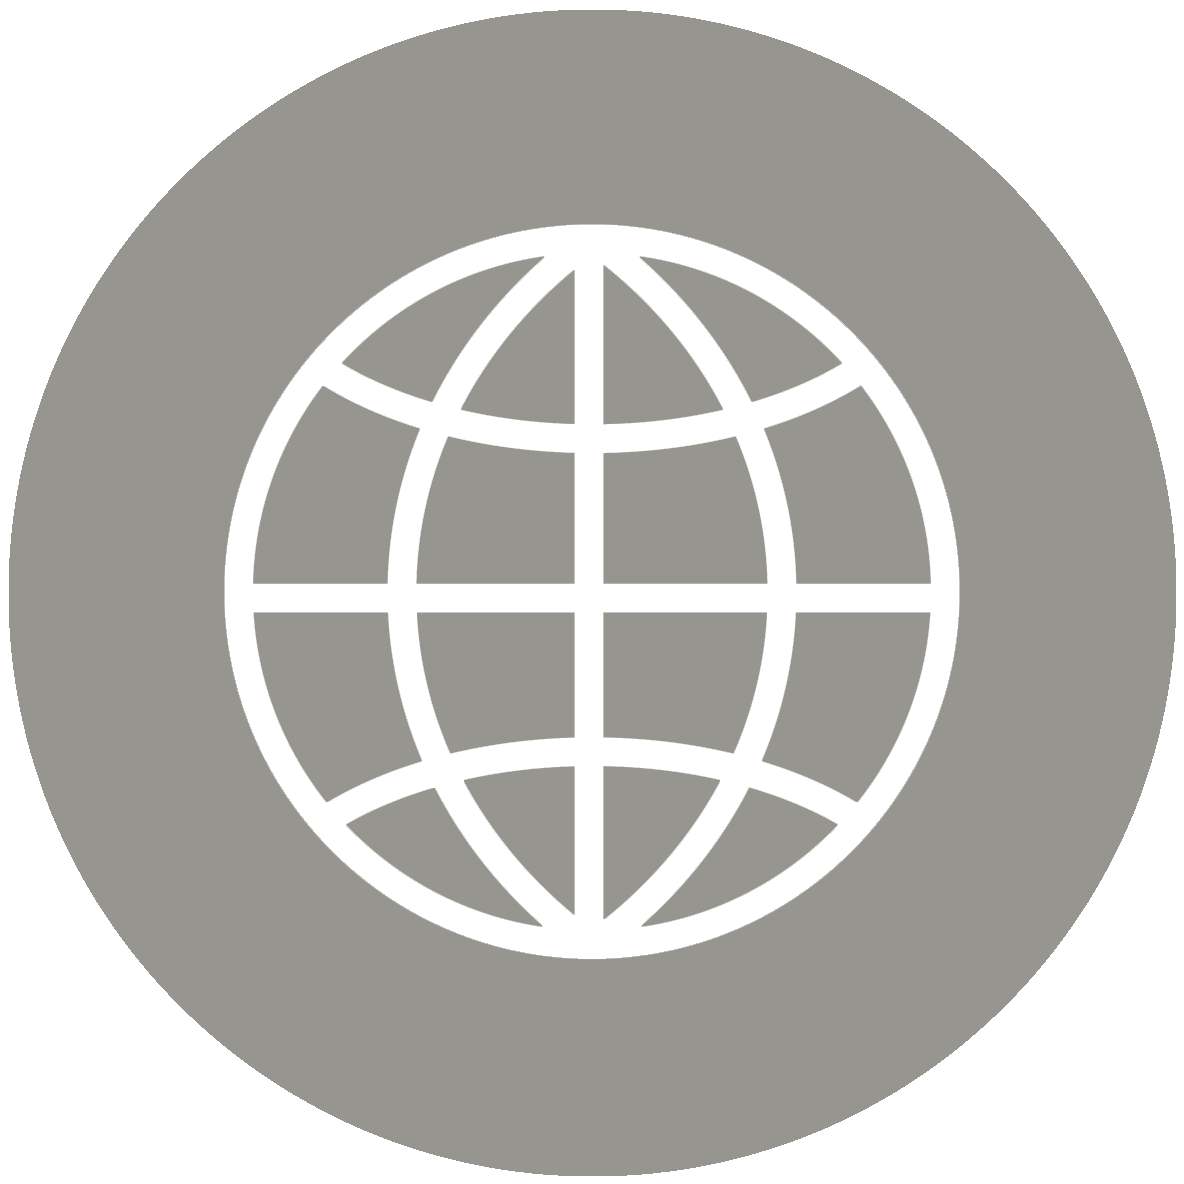 website-icon-png-transparent-24 grey.png